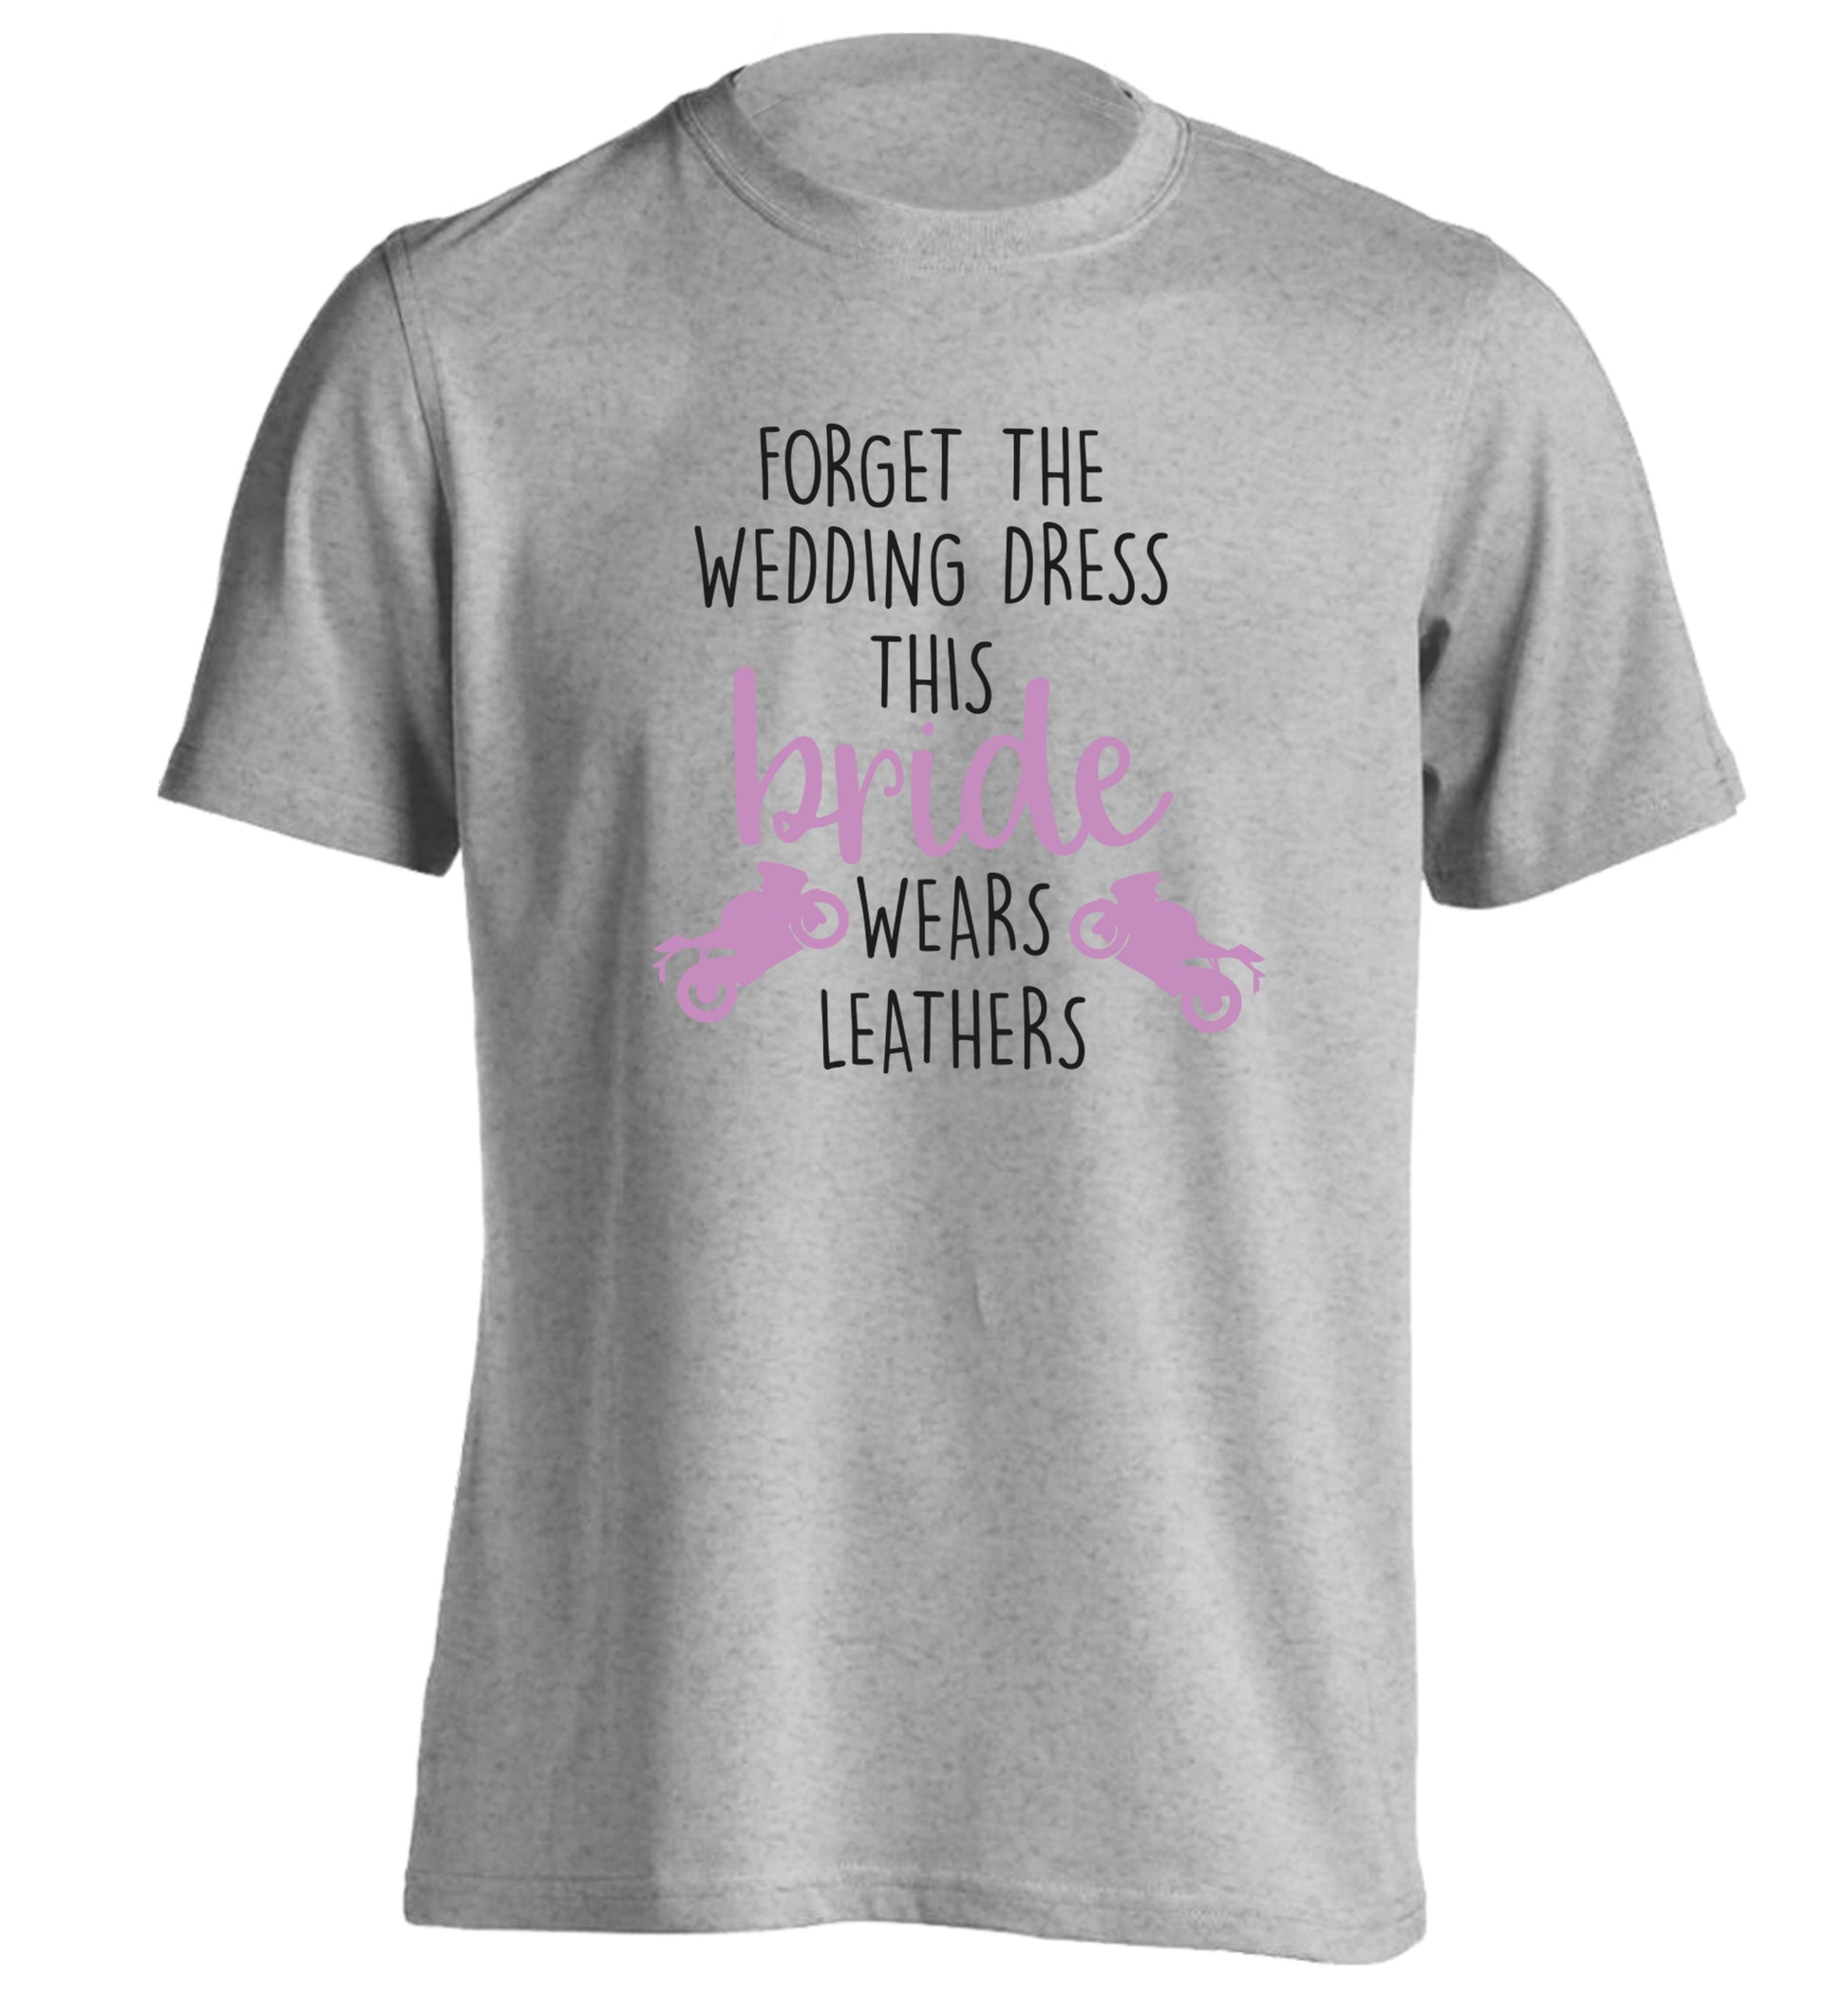 Forget the wedding dress this bride wears leathers adults unisex grey Tshirt 2XL